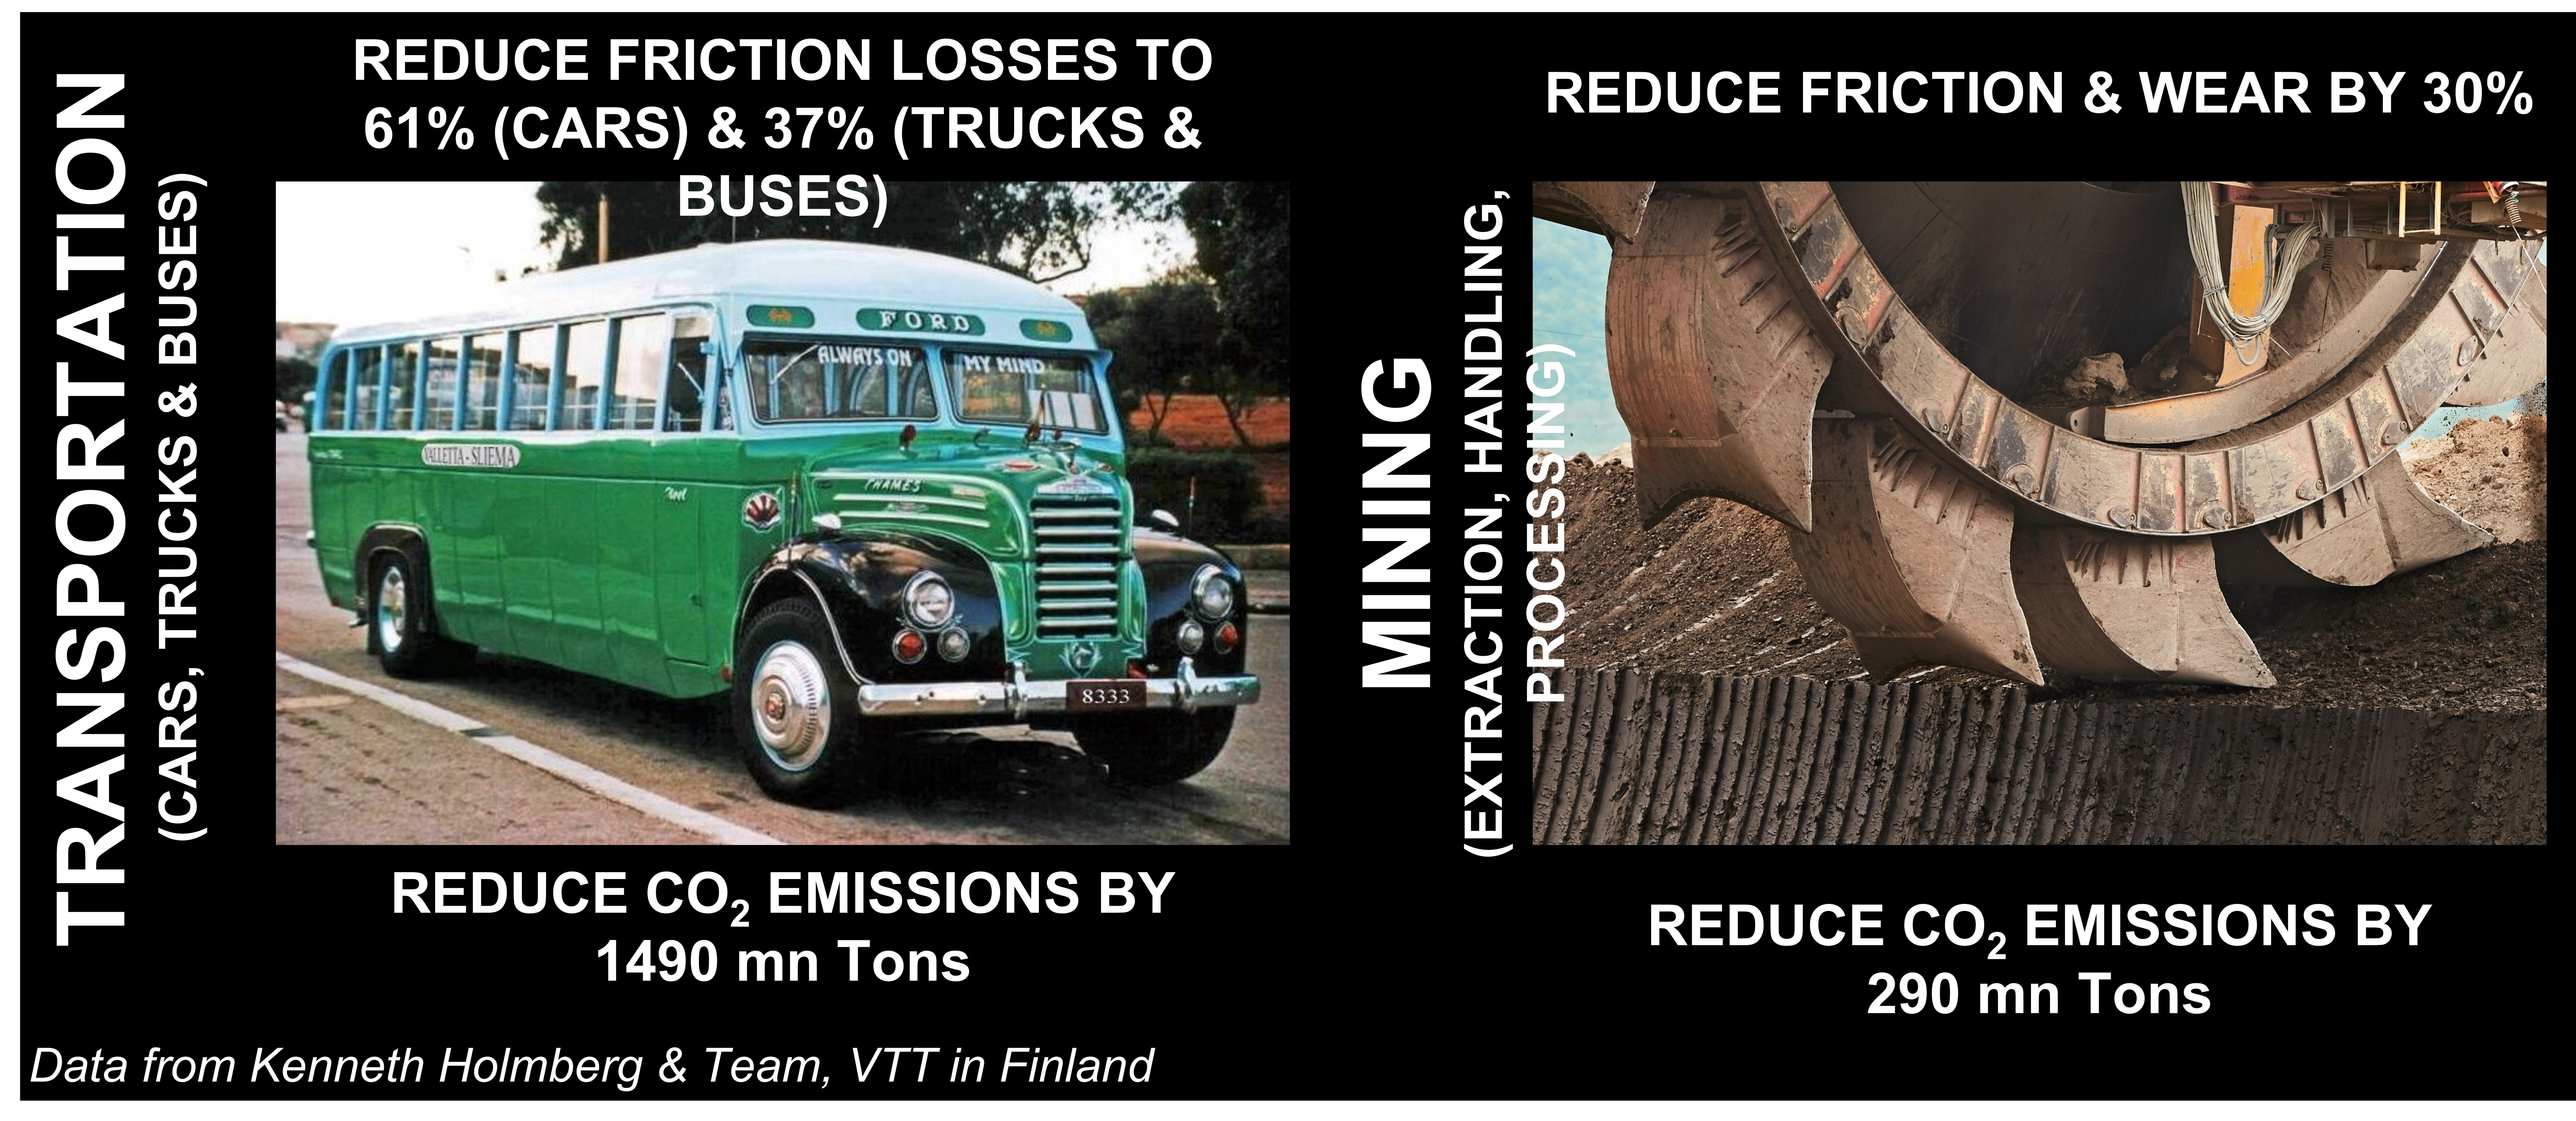 Friction and wear of materials are related to carbon emission.